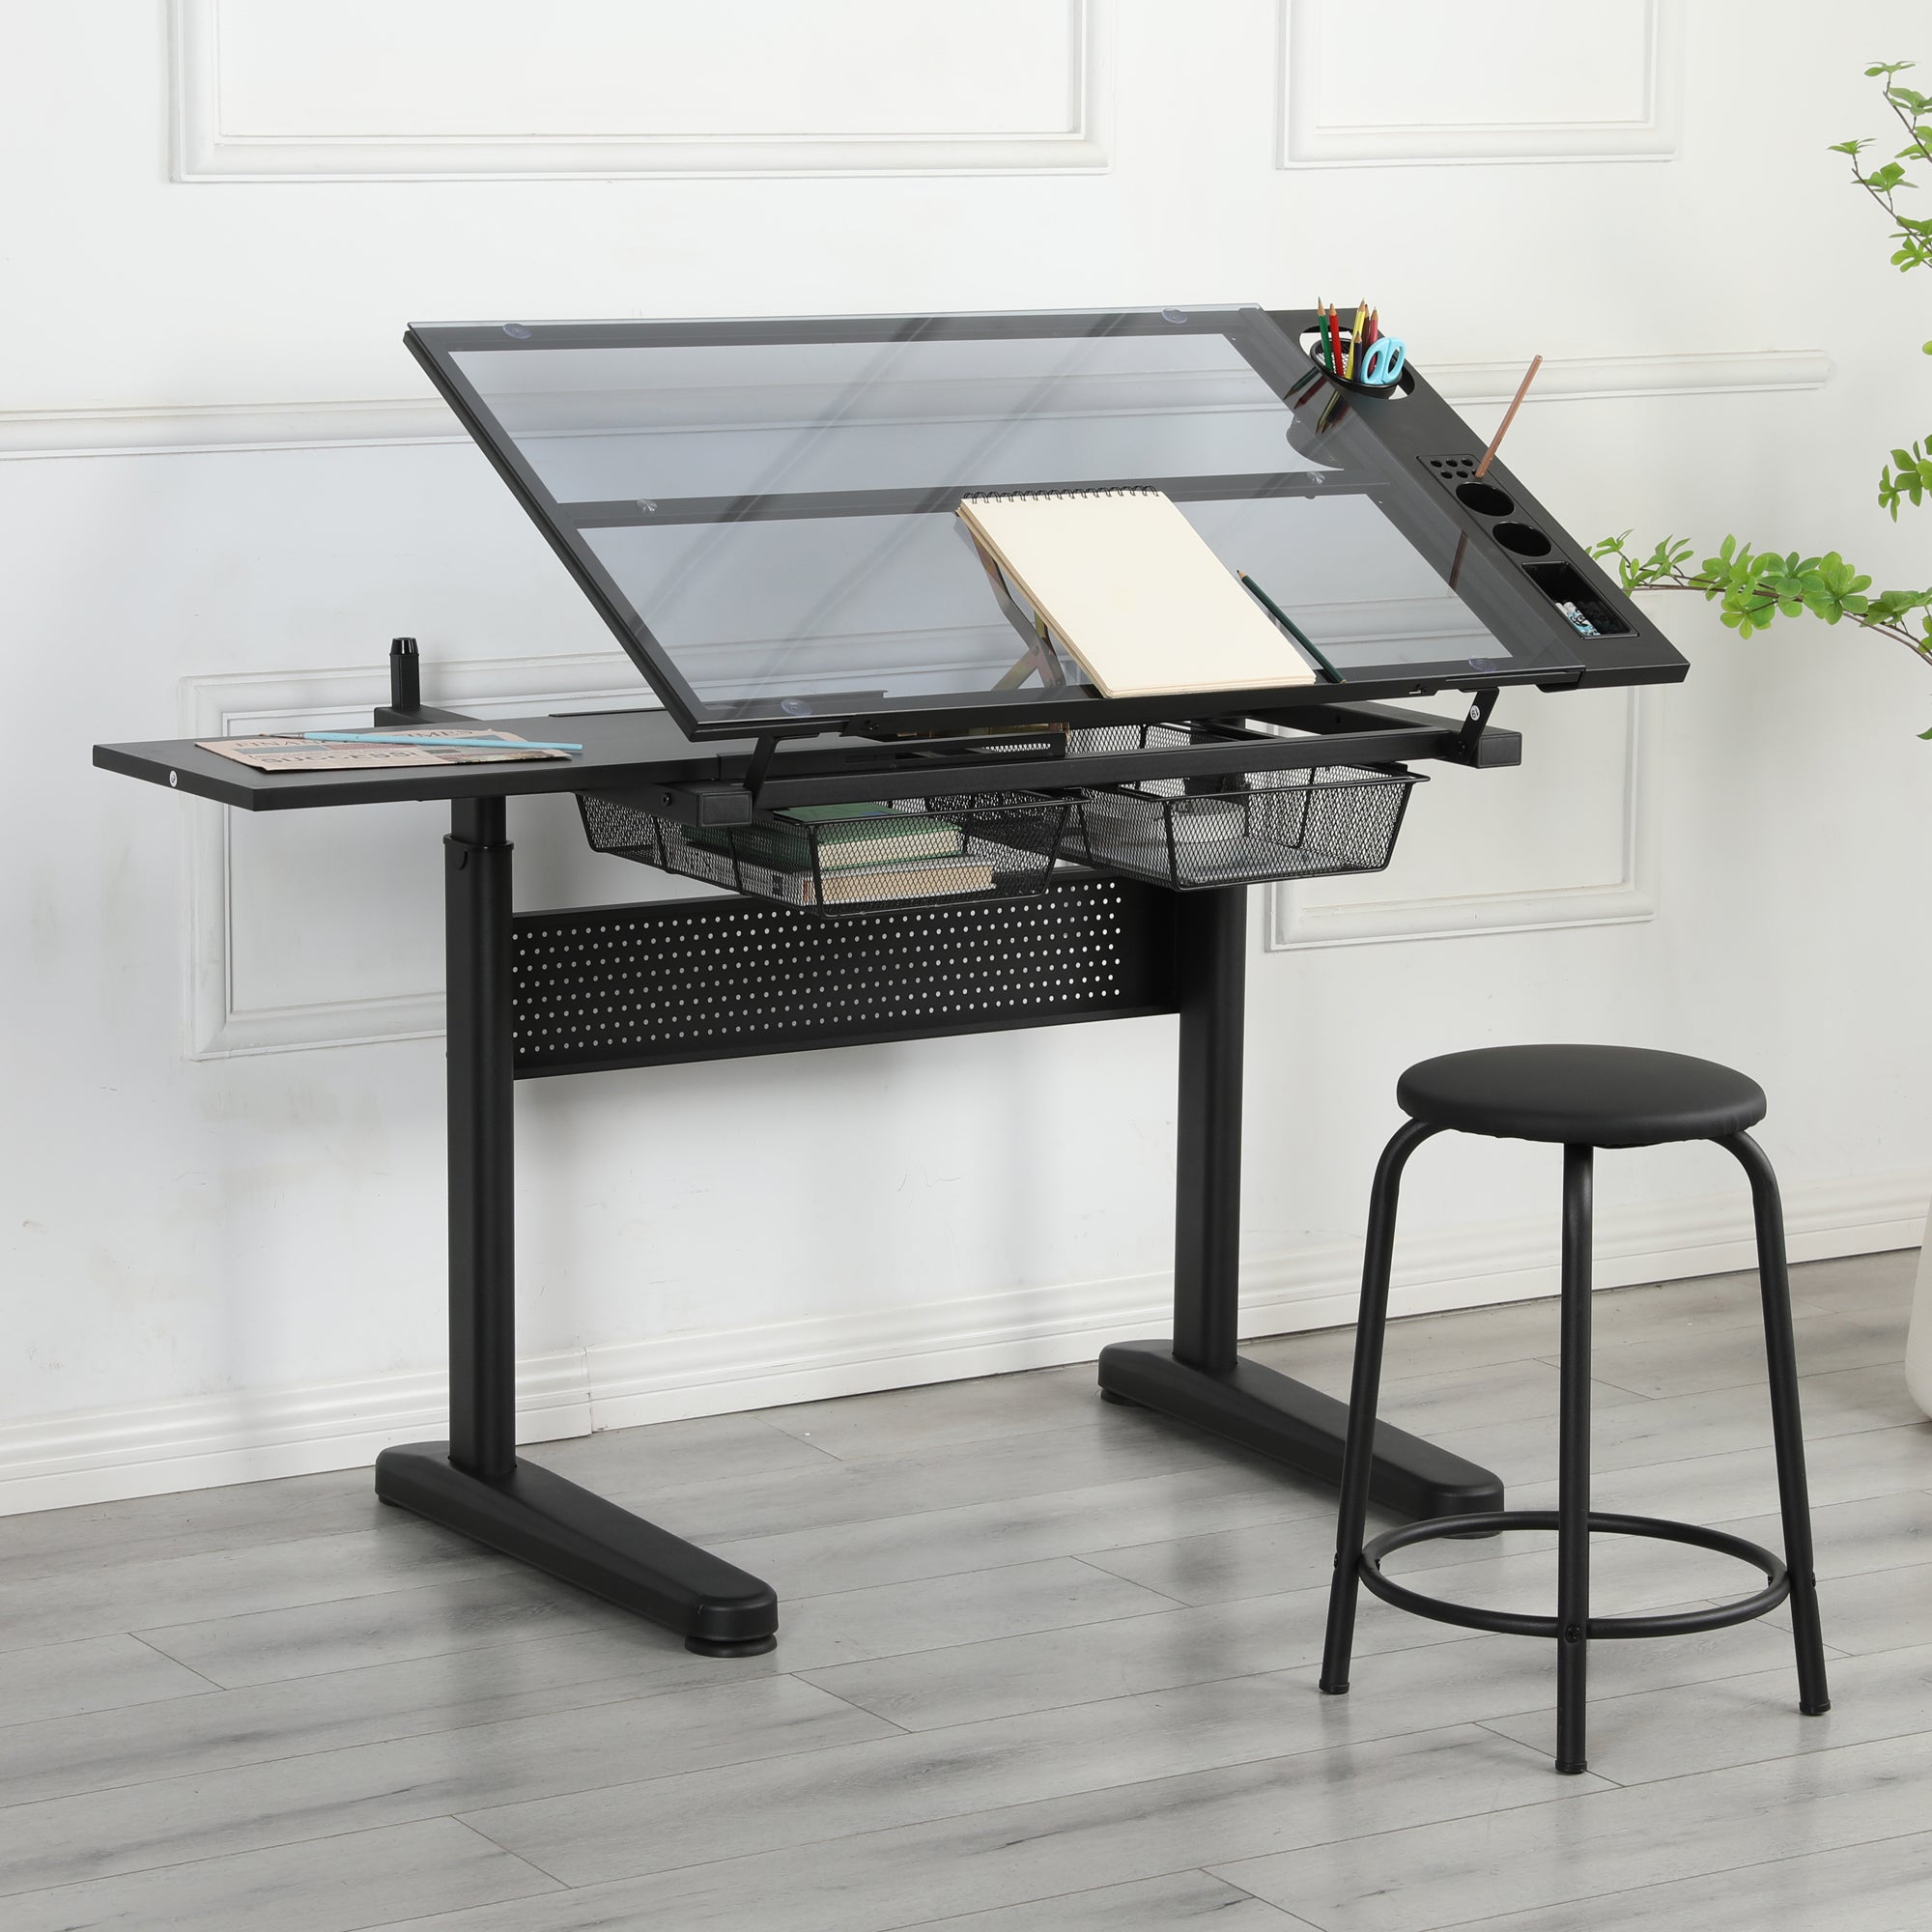 hand crank adjustable drafting table drawing desk with black-tempered glass+sheet metal+plastic